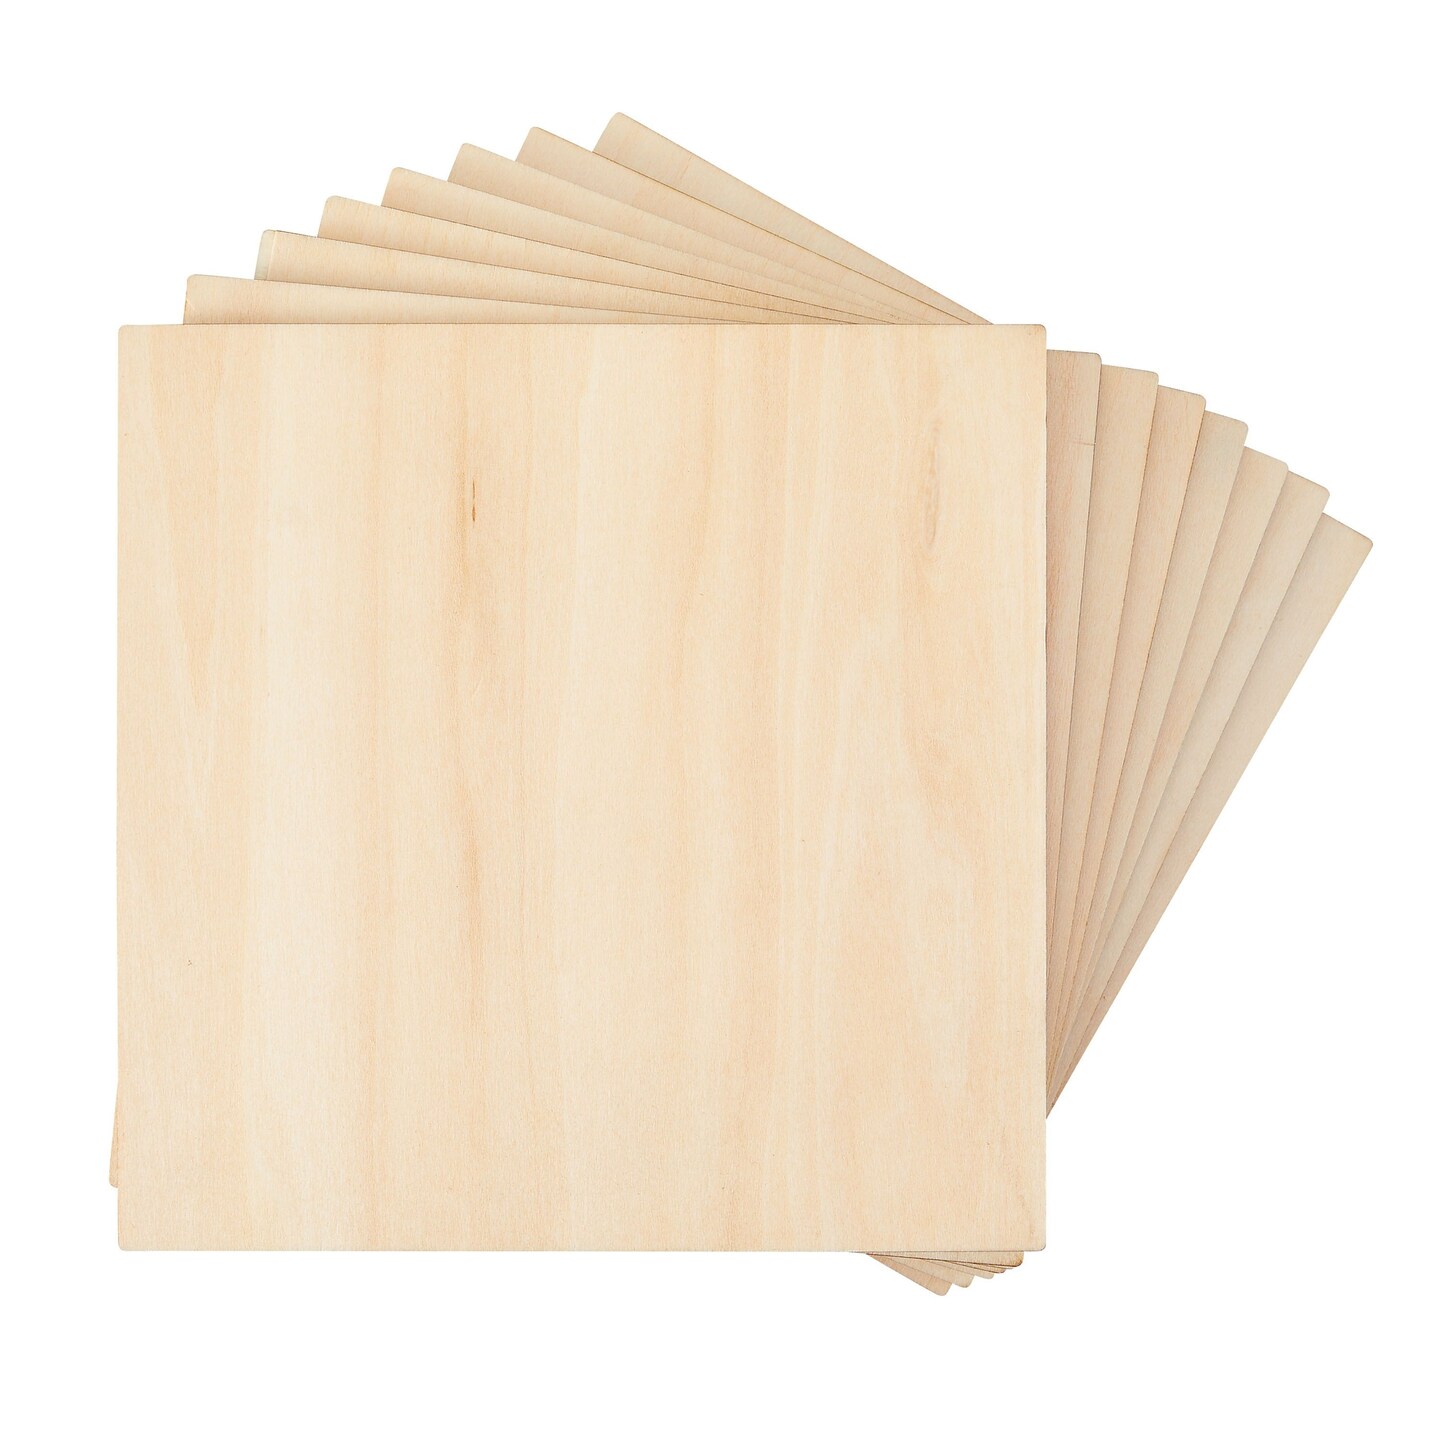 8 Pack Unfinished 6x6 Wood Squares, Thin 1/4 Basswood Plywood for DIY  Crafts, Wood Burning